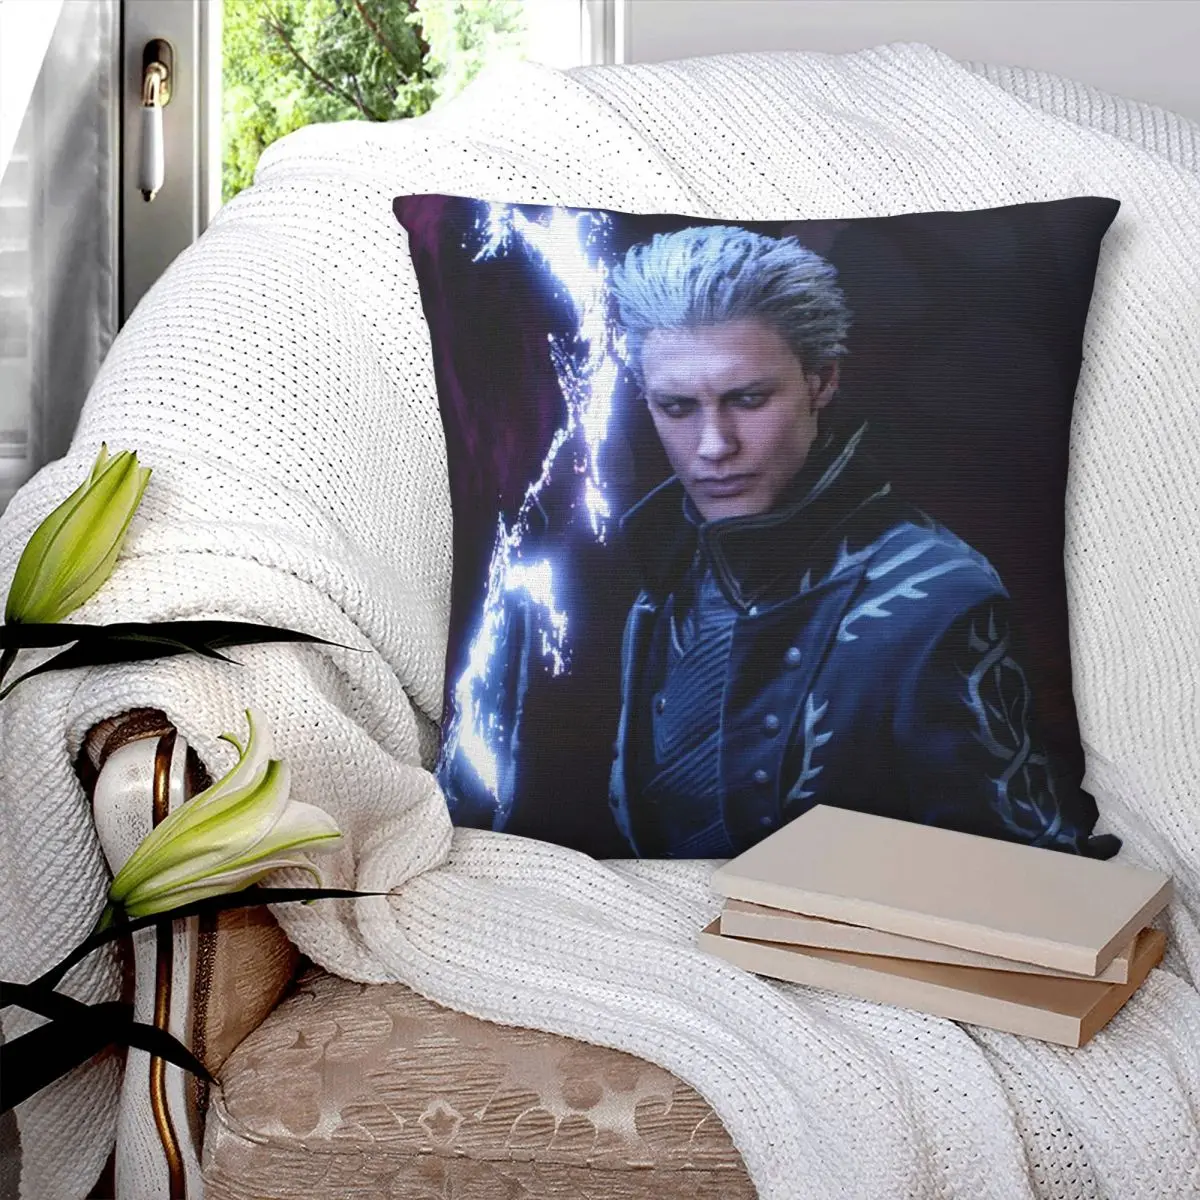 

Vergil From The Devil May Cry Series Square Pillowcase Pillow Cover Polyester Cushion Comfort Throw Pillow for Home Car